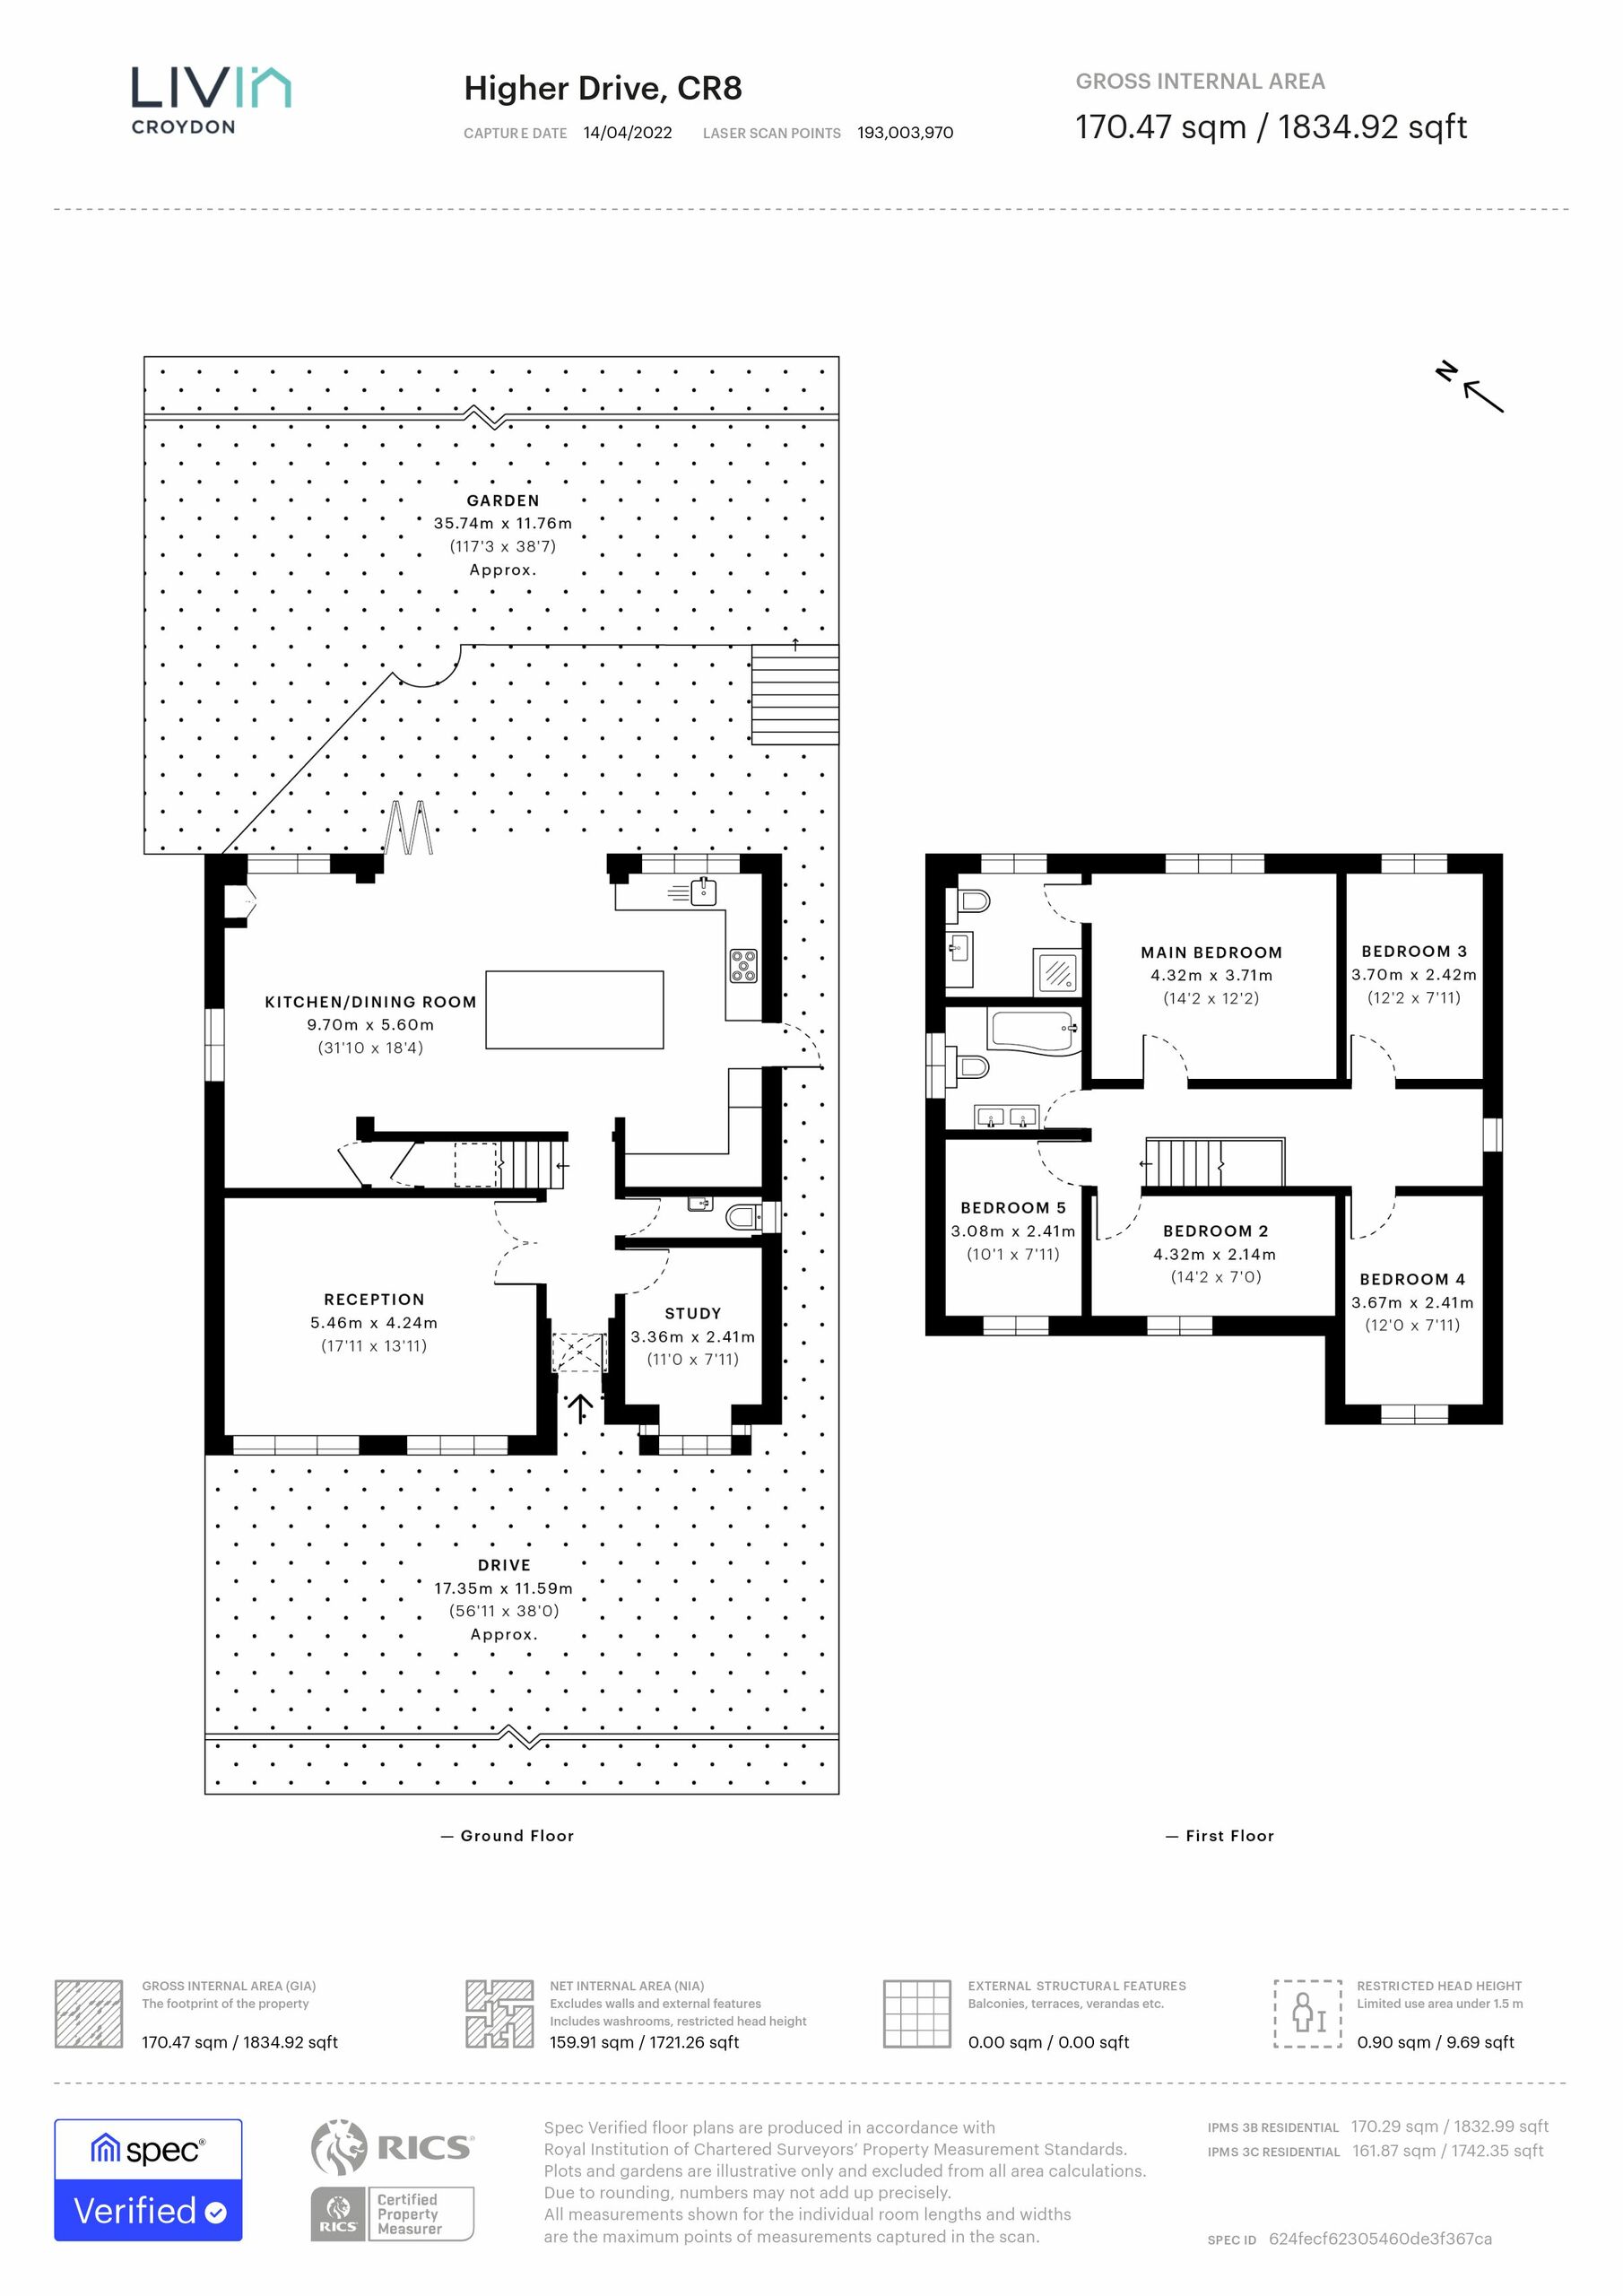 5 bed detached house for sale, Purley - Property floorplan